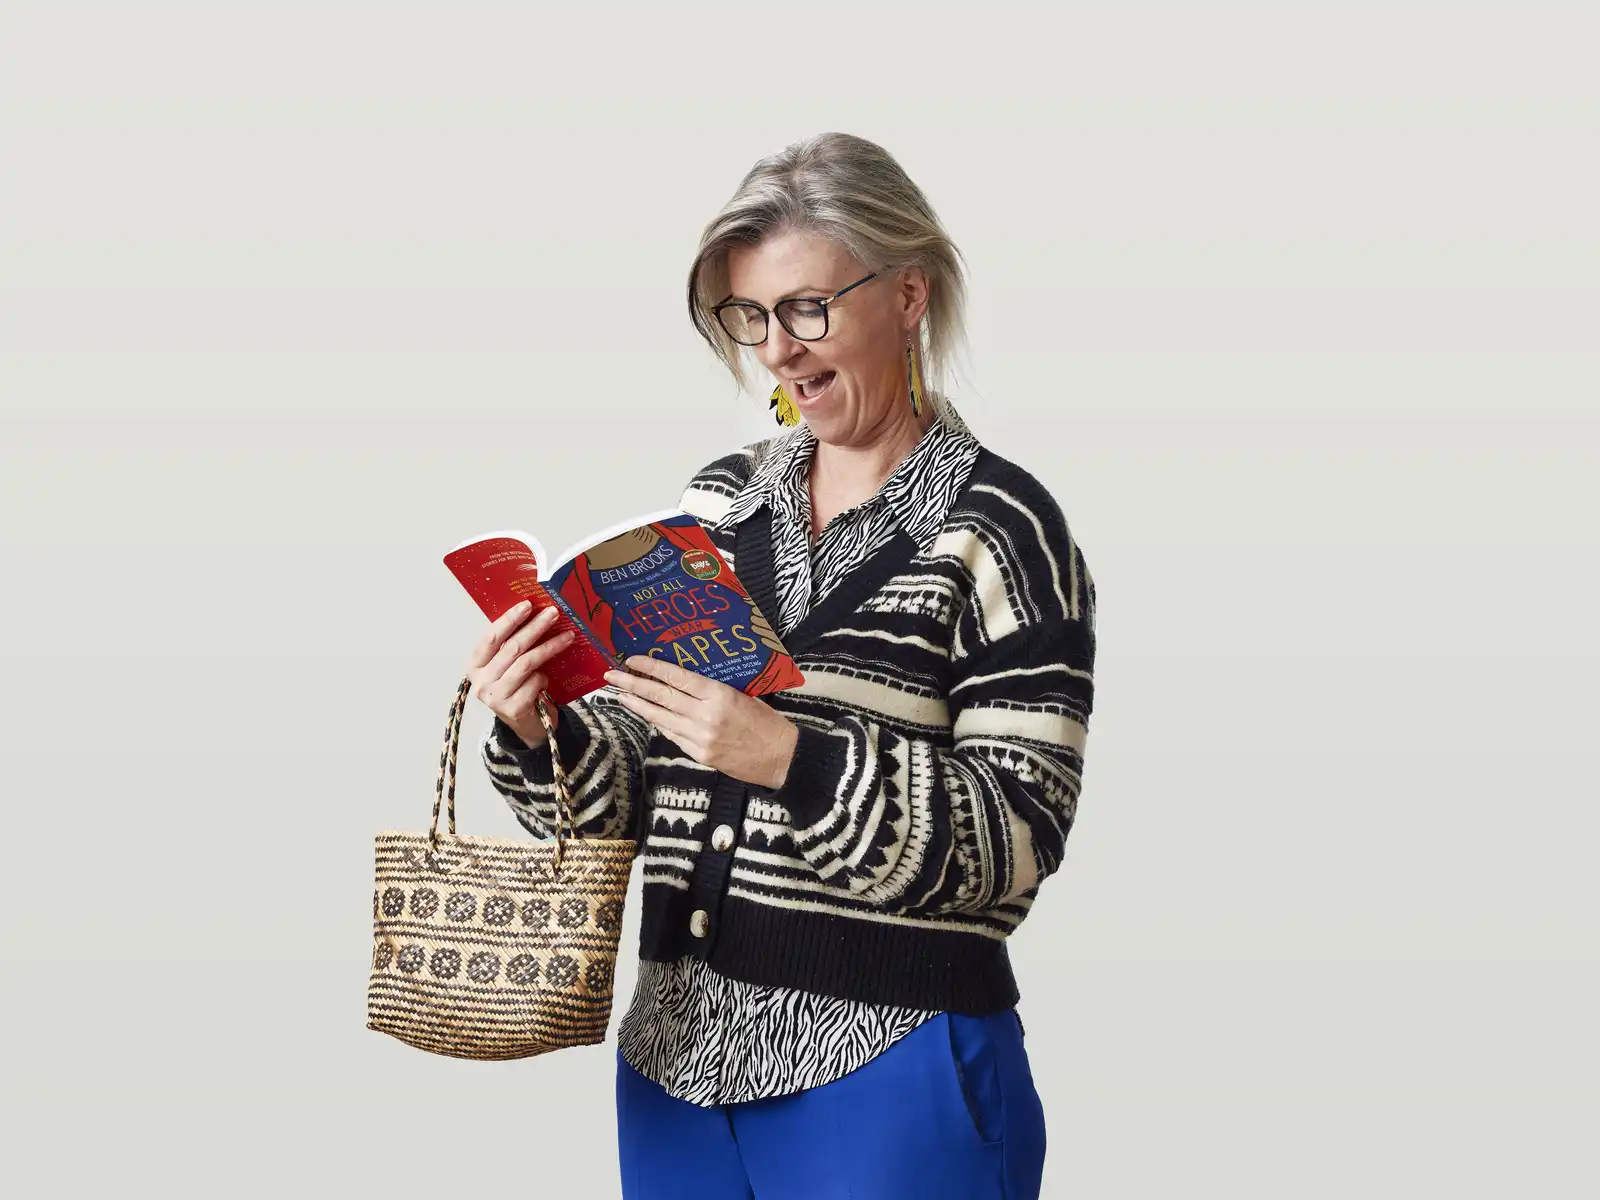 Kowhai reading the book "Not All Heroes Wear Capes" and holding a kete